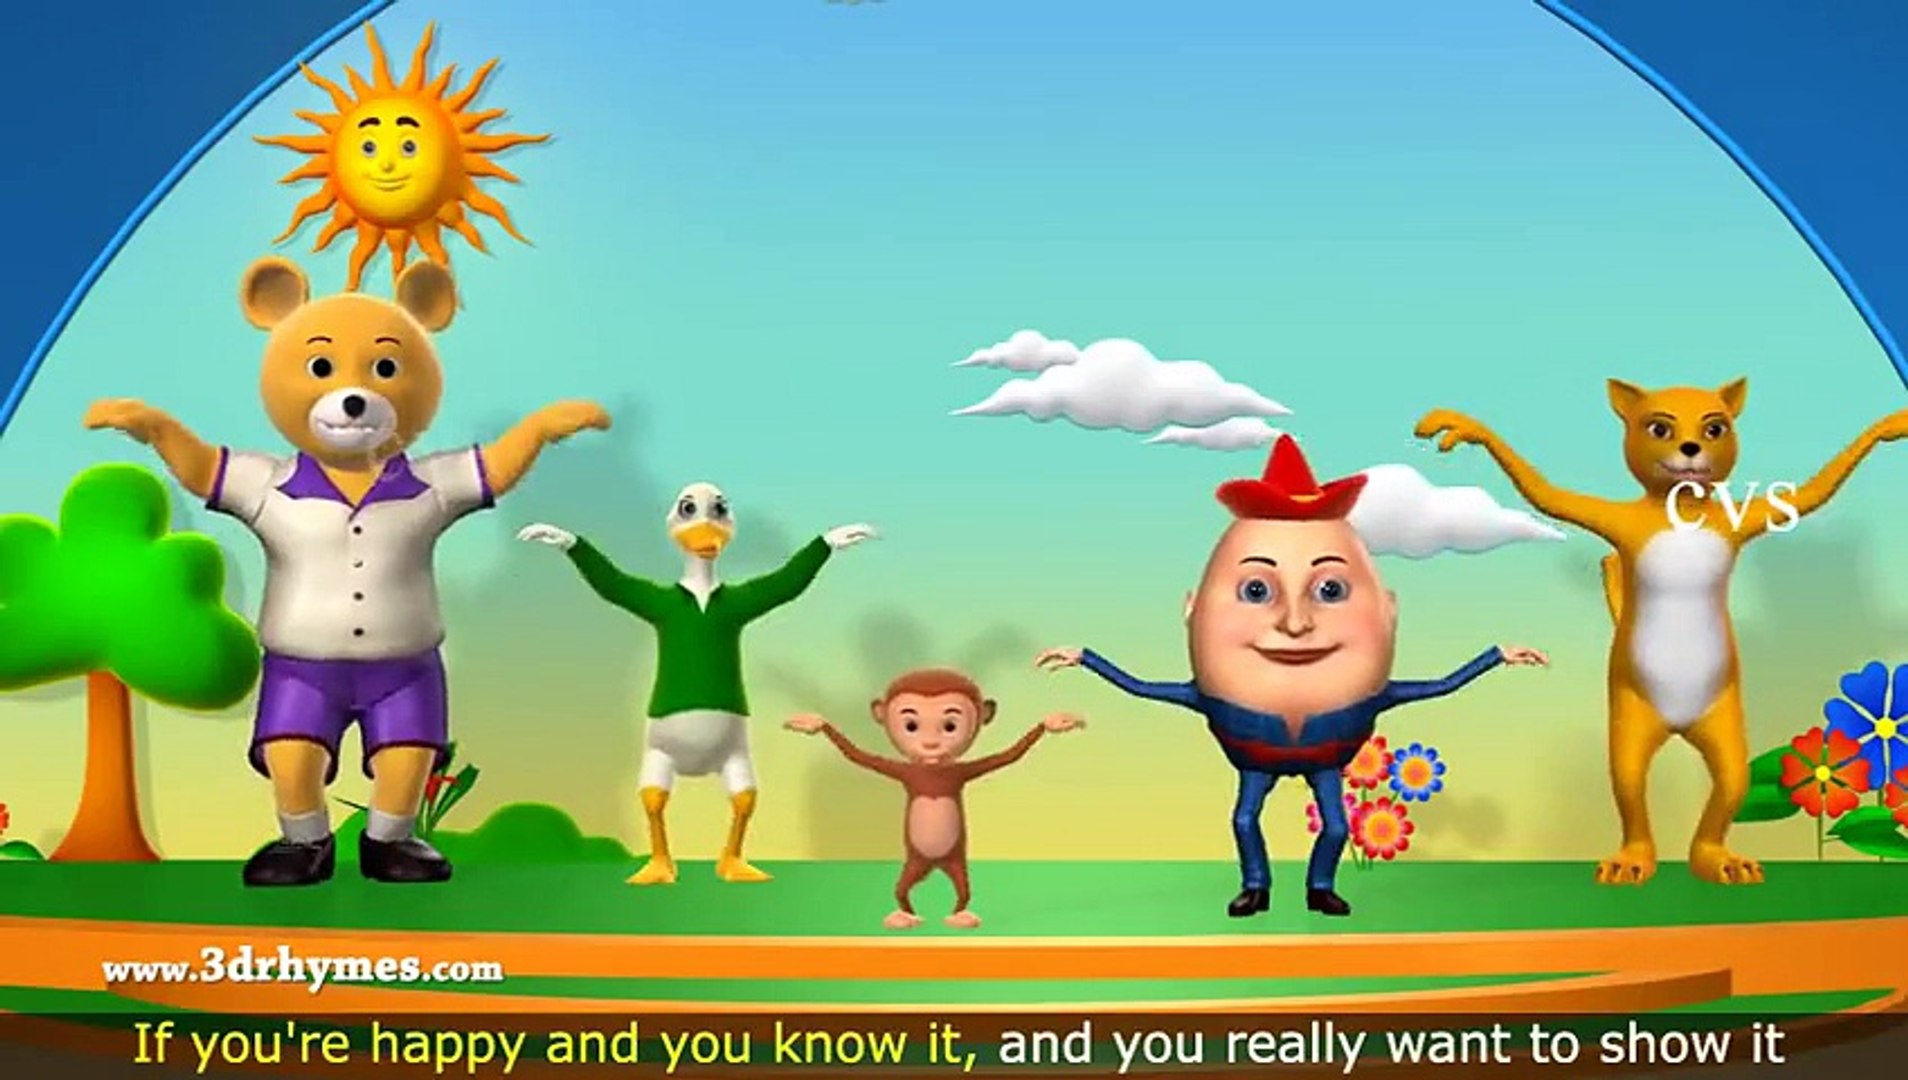 If You're Happy and You Know it Clap Your Hands Song - 3D Animation Rhymes  for Children.mp4 - video Dailymotion